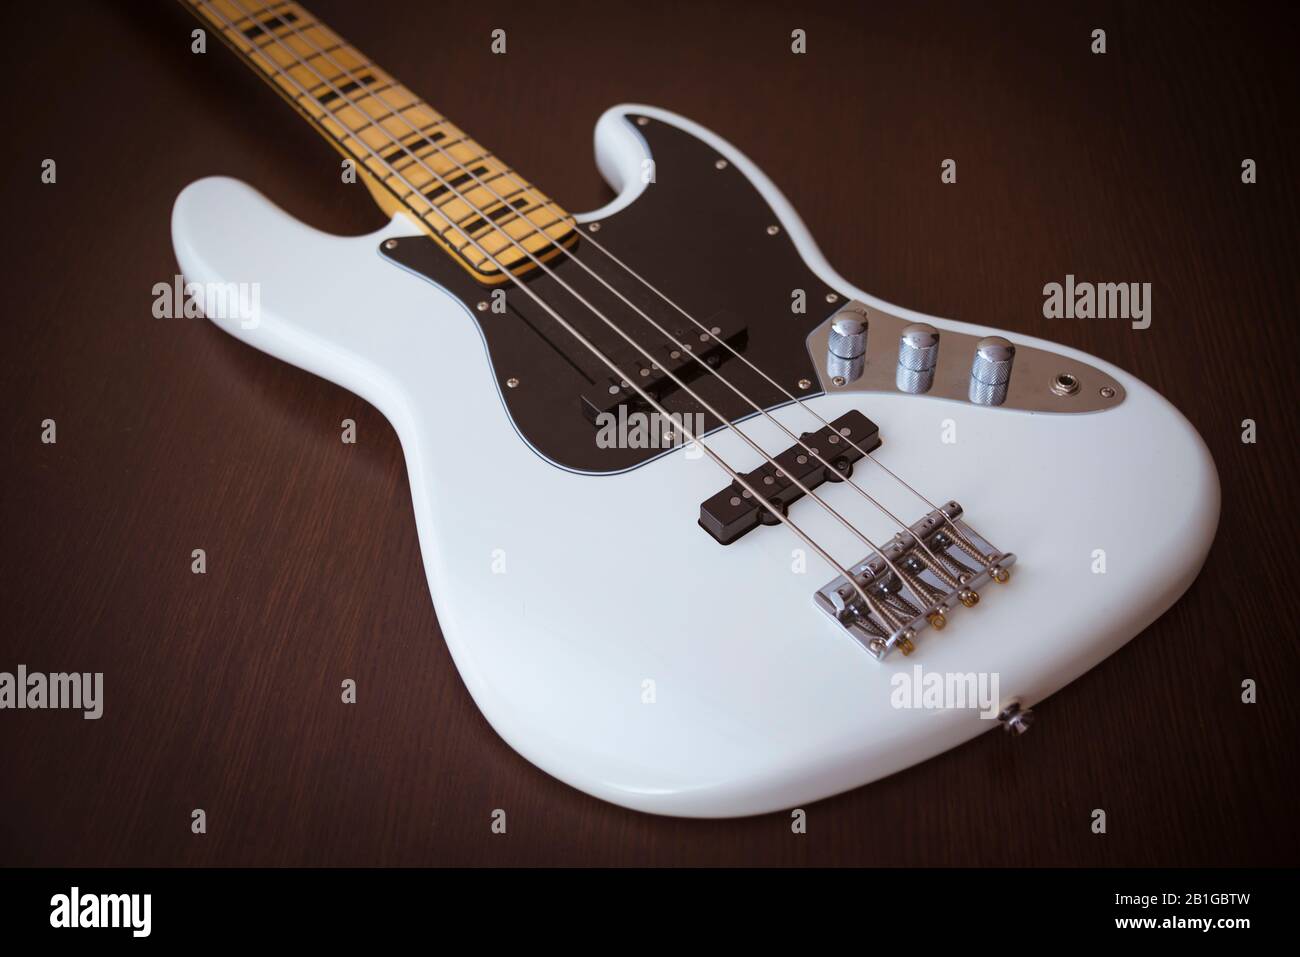 White Electric Bass Guitar with Maple Neck, Black Pickguard, and Black Block Inlays on a Simple Wooden Background Stock Photo